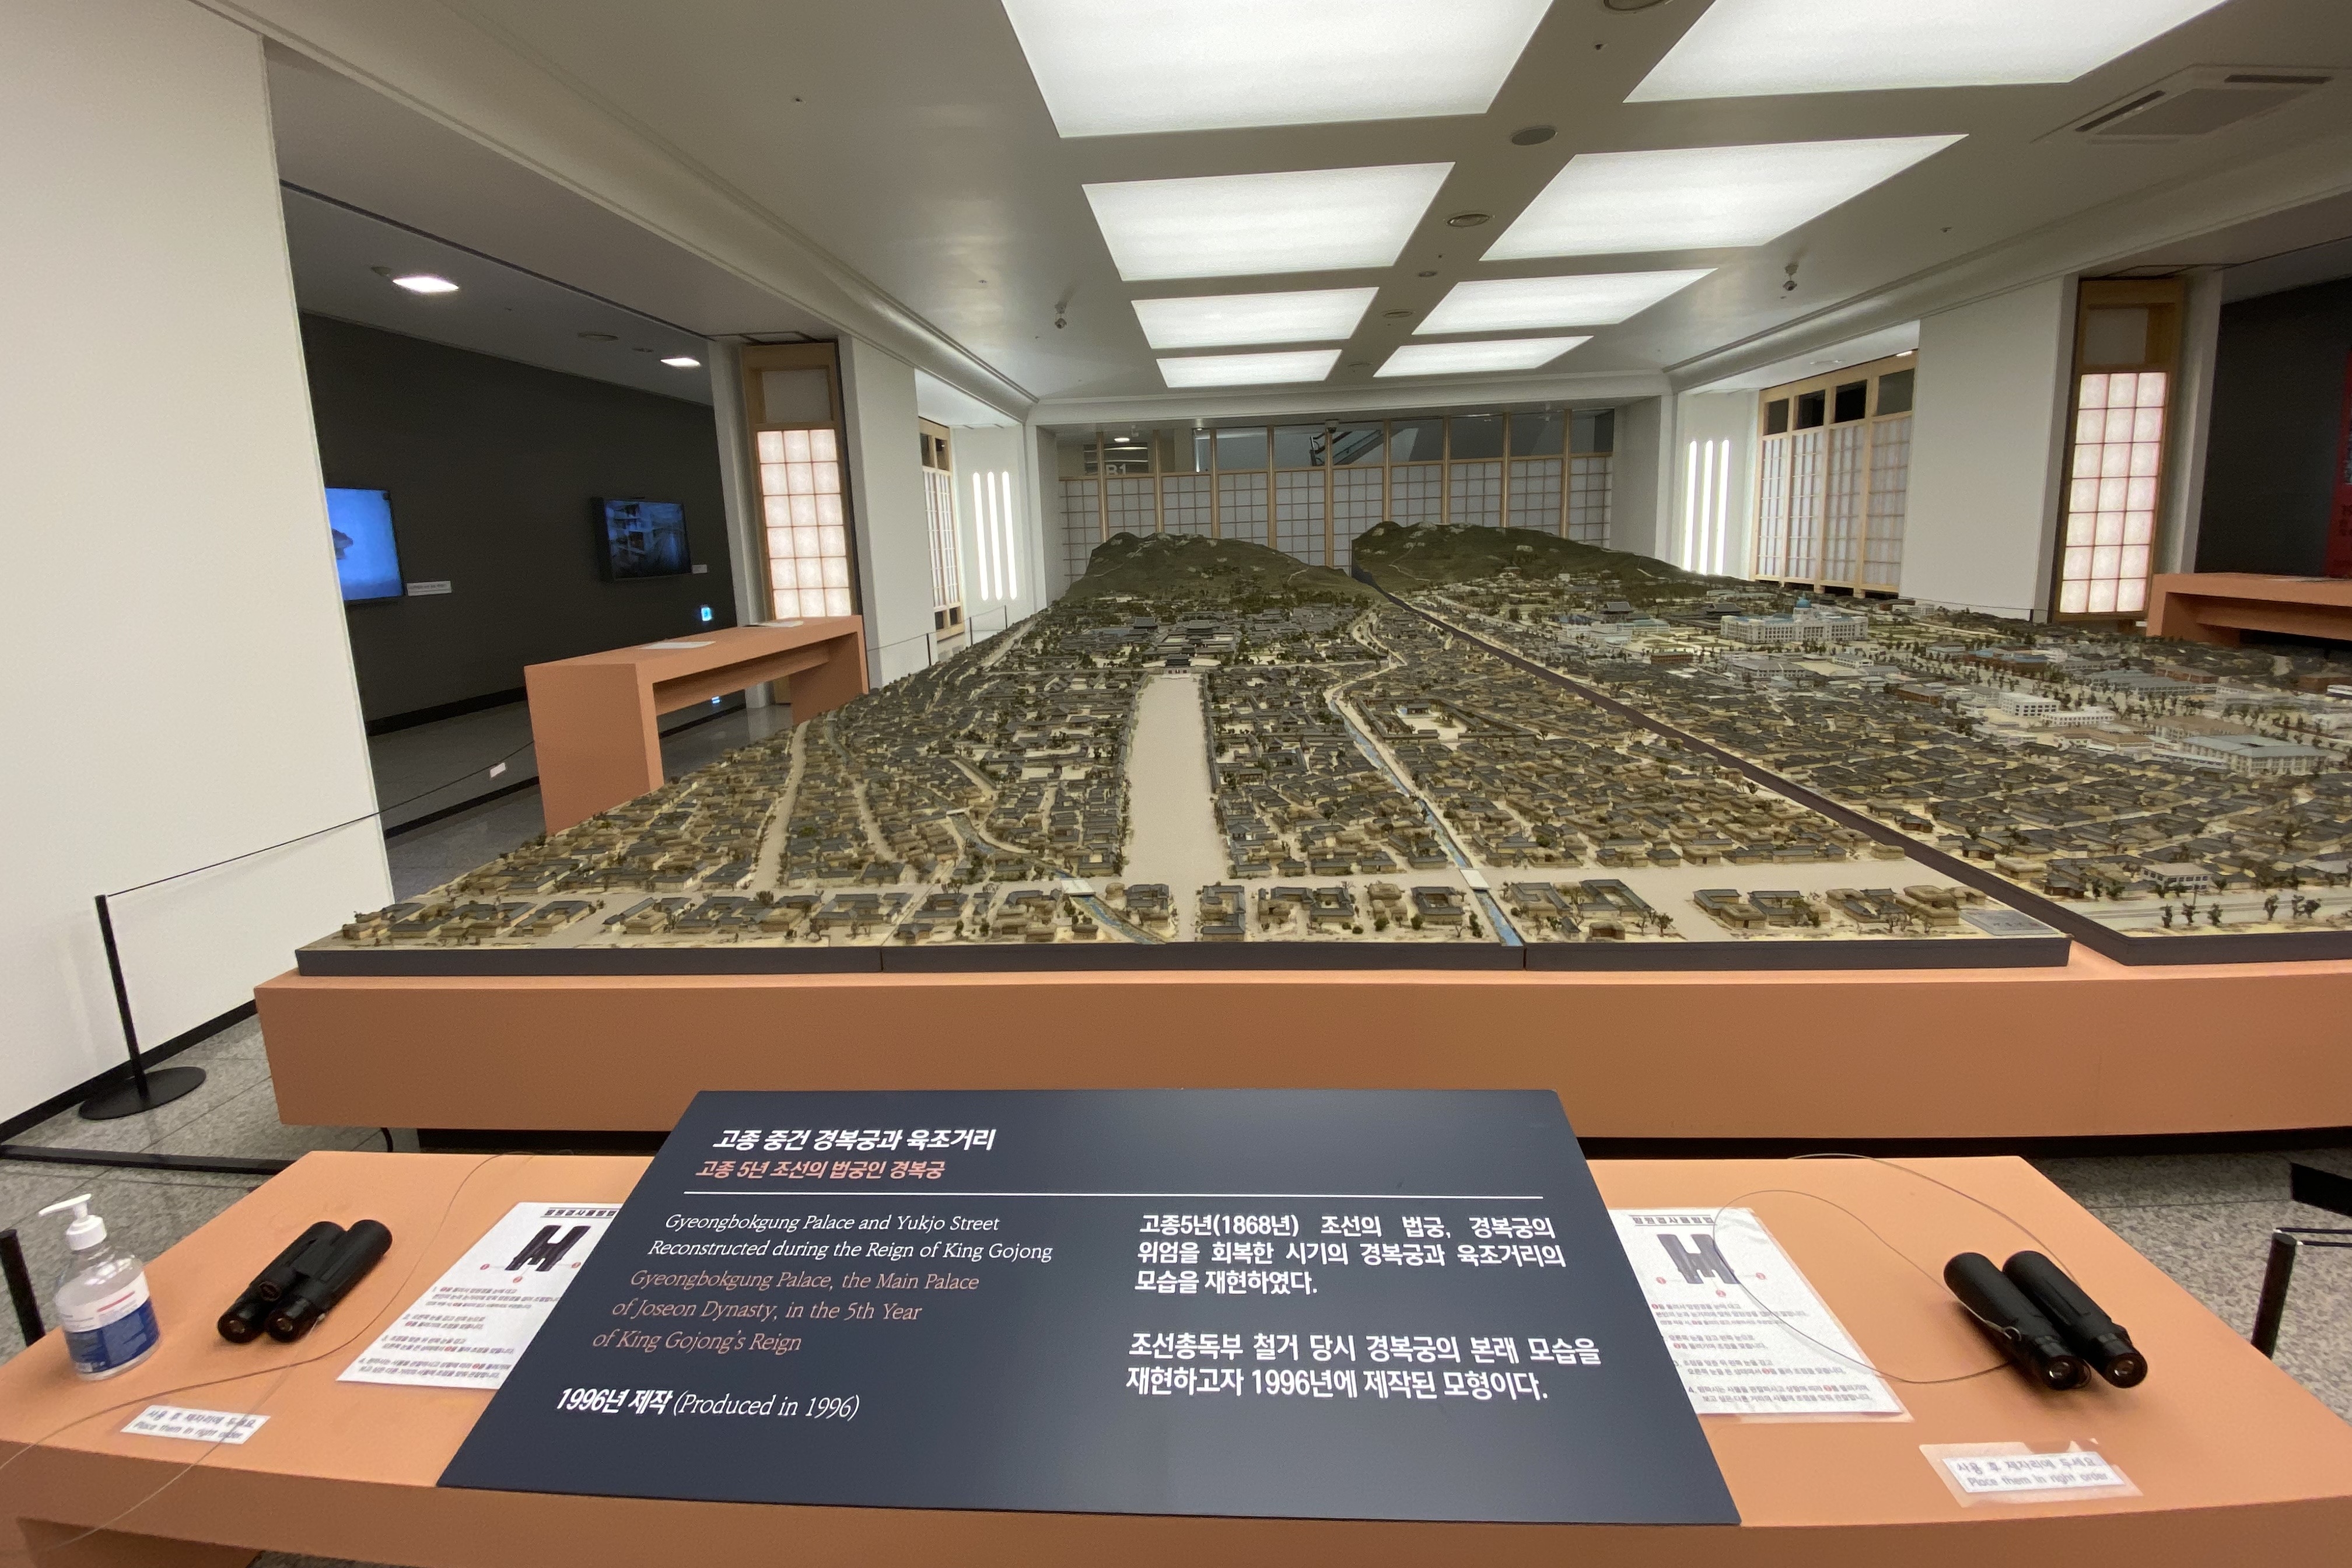 National Palace Museum of Korea4 : A Scale model of the Gyeongbokgung Palace and the neighboring area